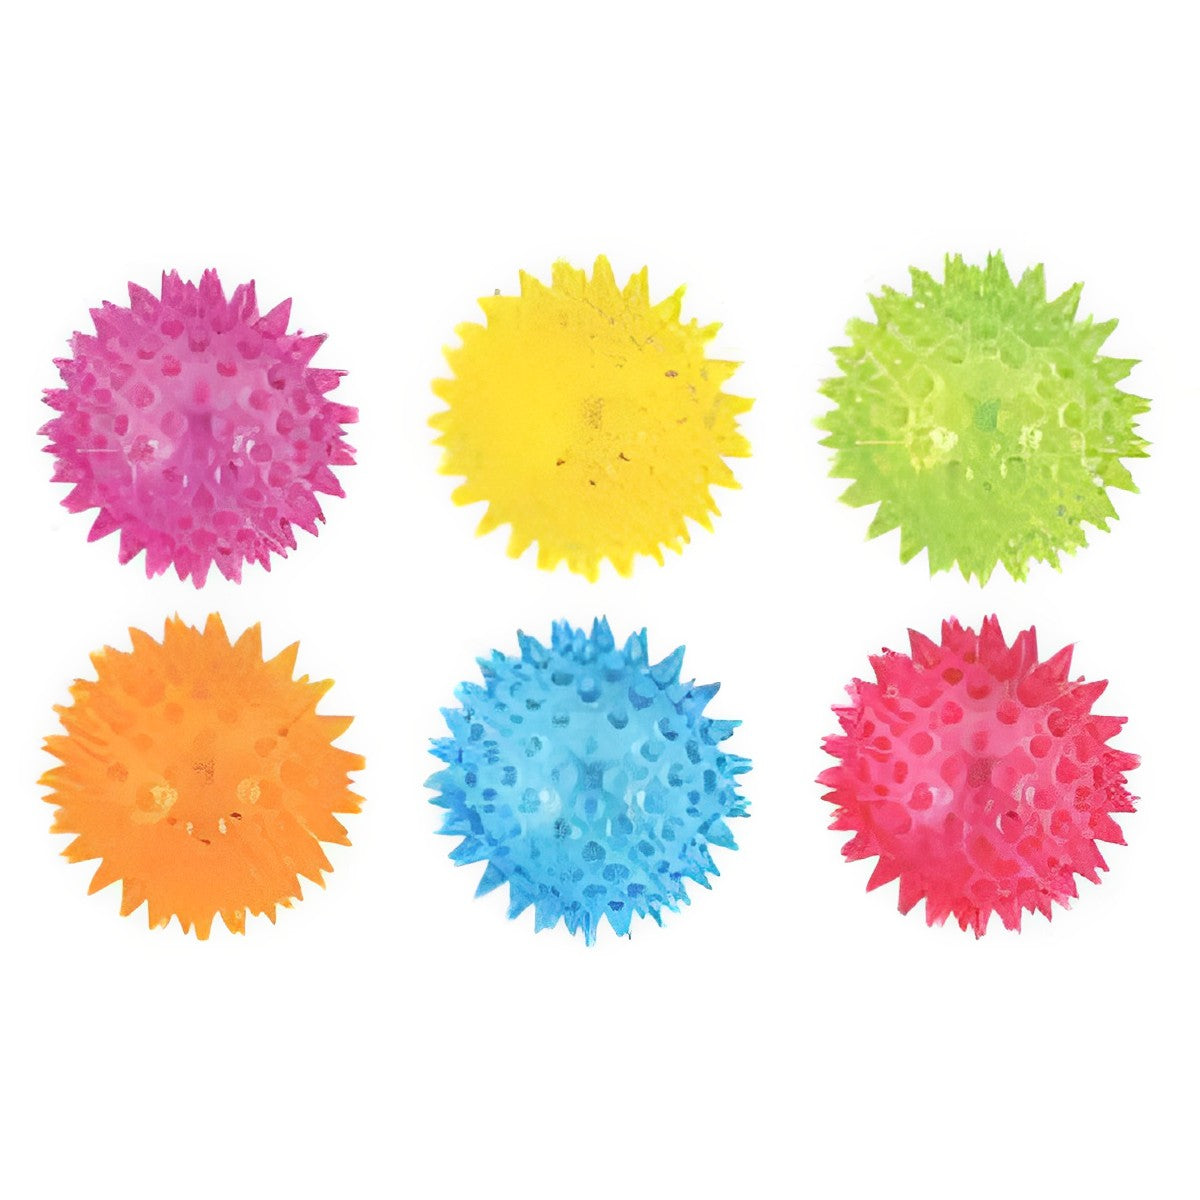 Neon Flashing Balls - Spikey Ball with Light - 6 pcs - Continental Food Store